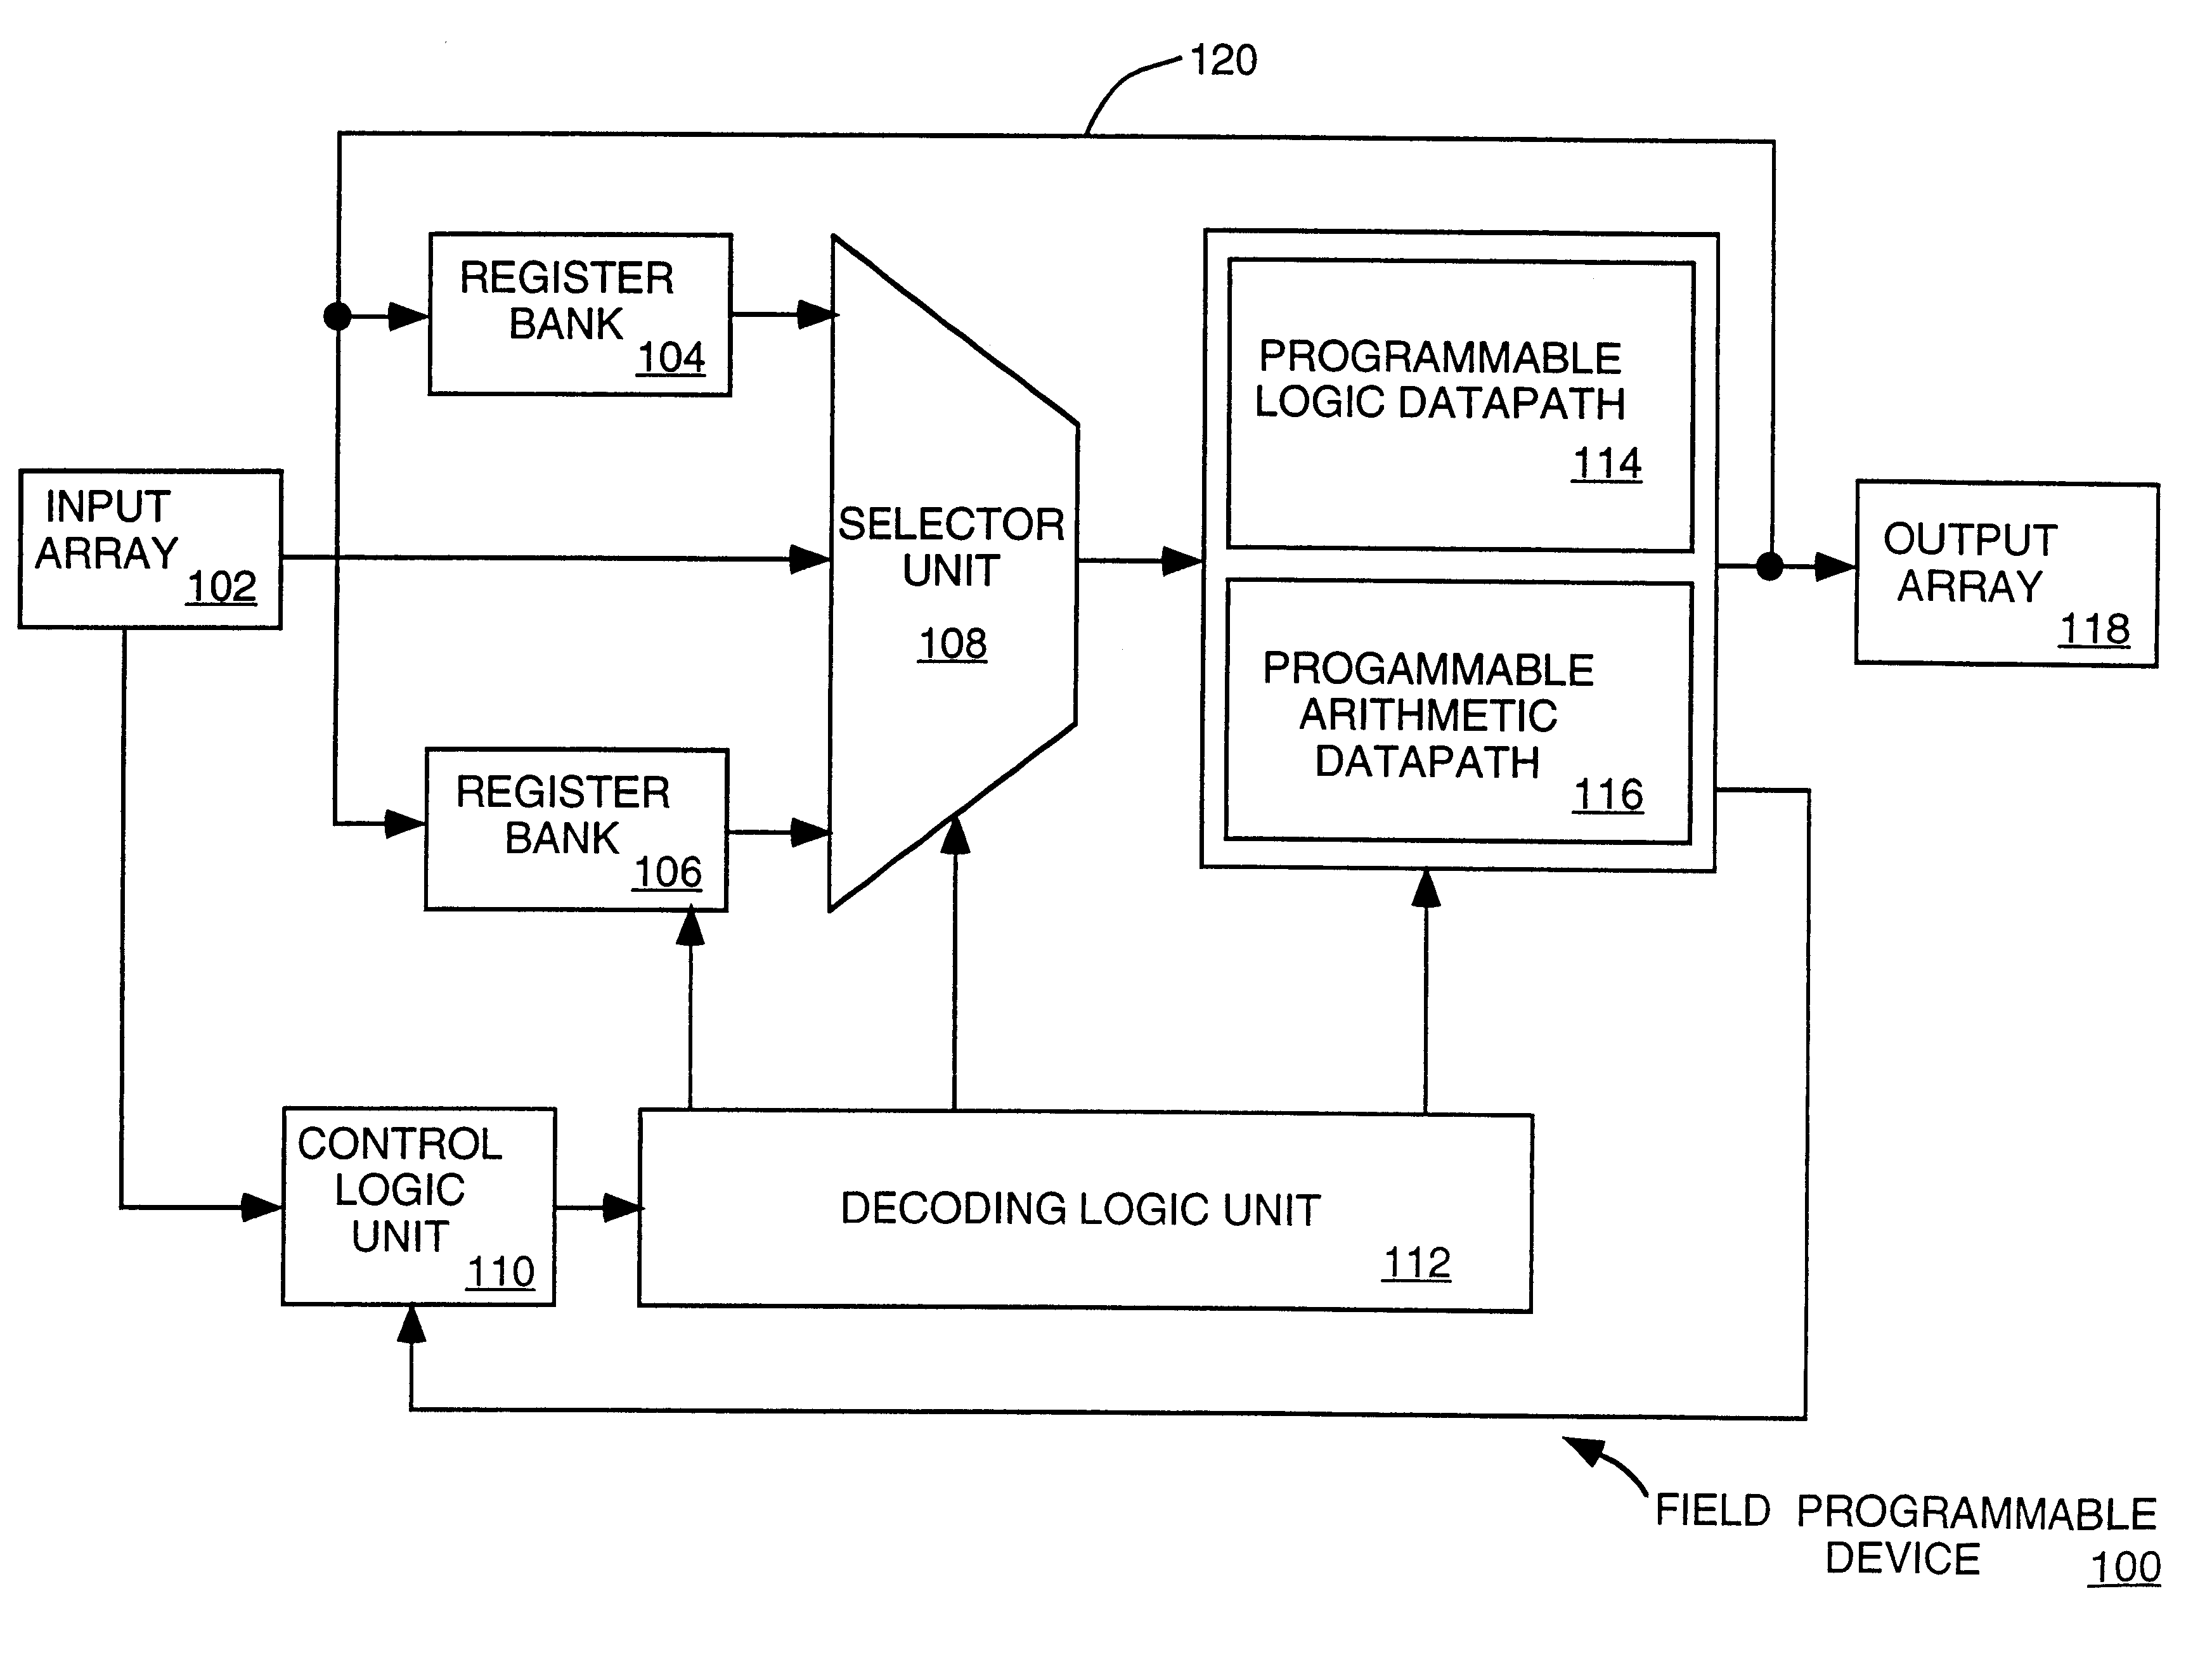 Programmable logic datapath that may be used in a field programmable device